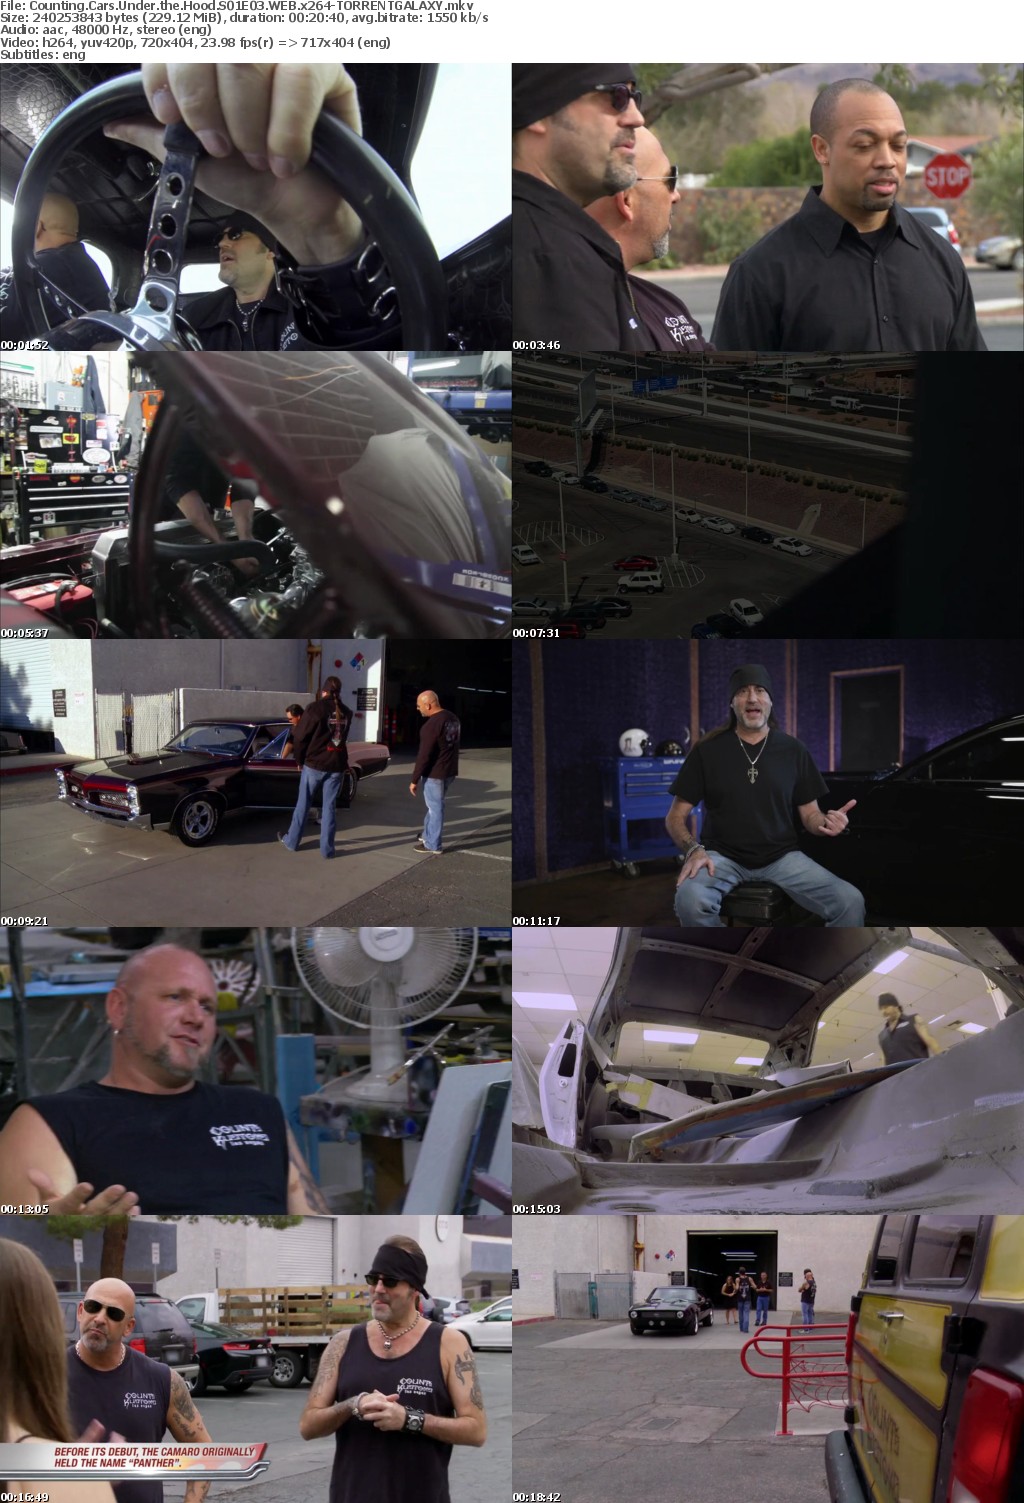 Counting Cars Under the Hood S01E03 WEB x264-GALAXY